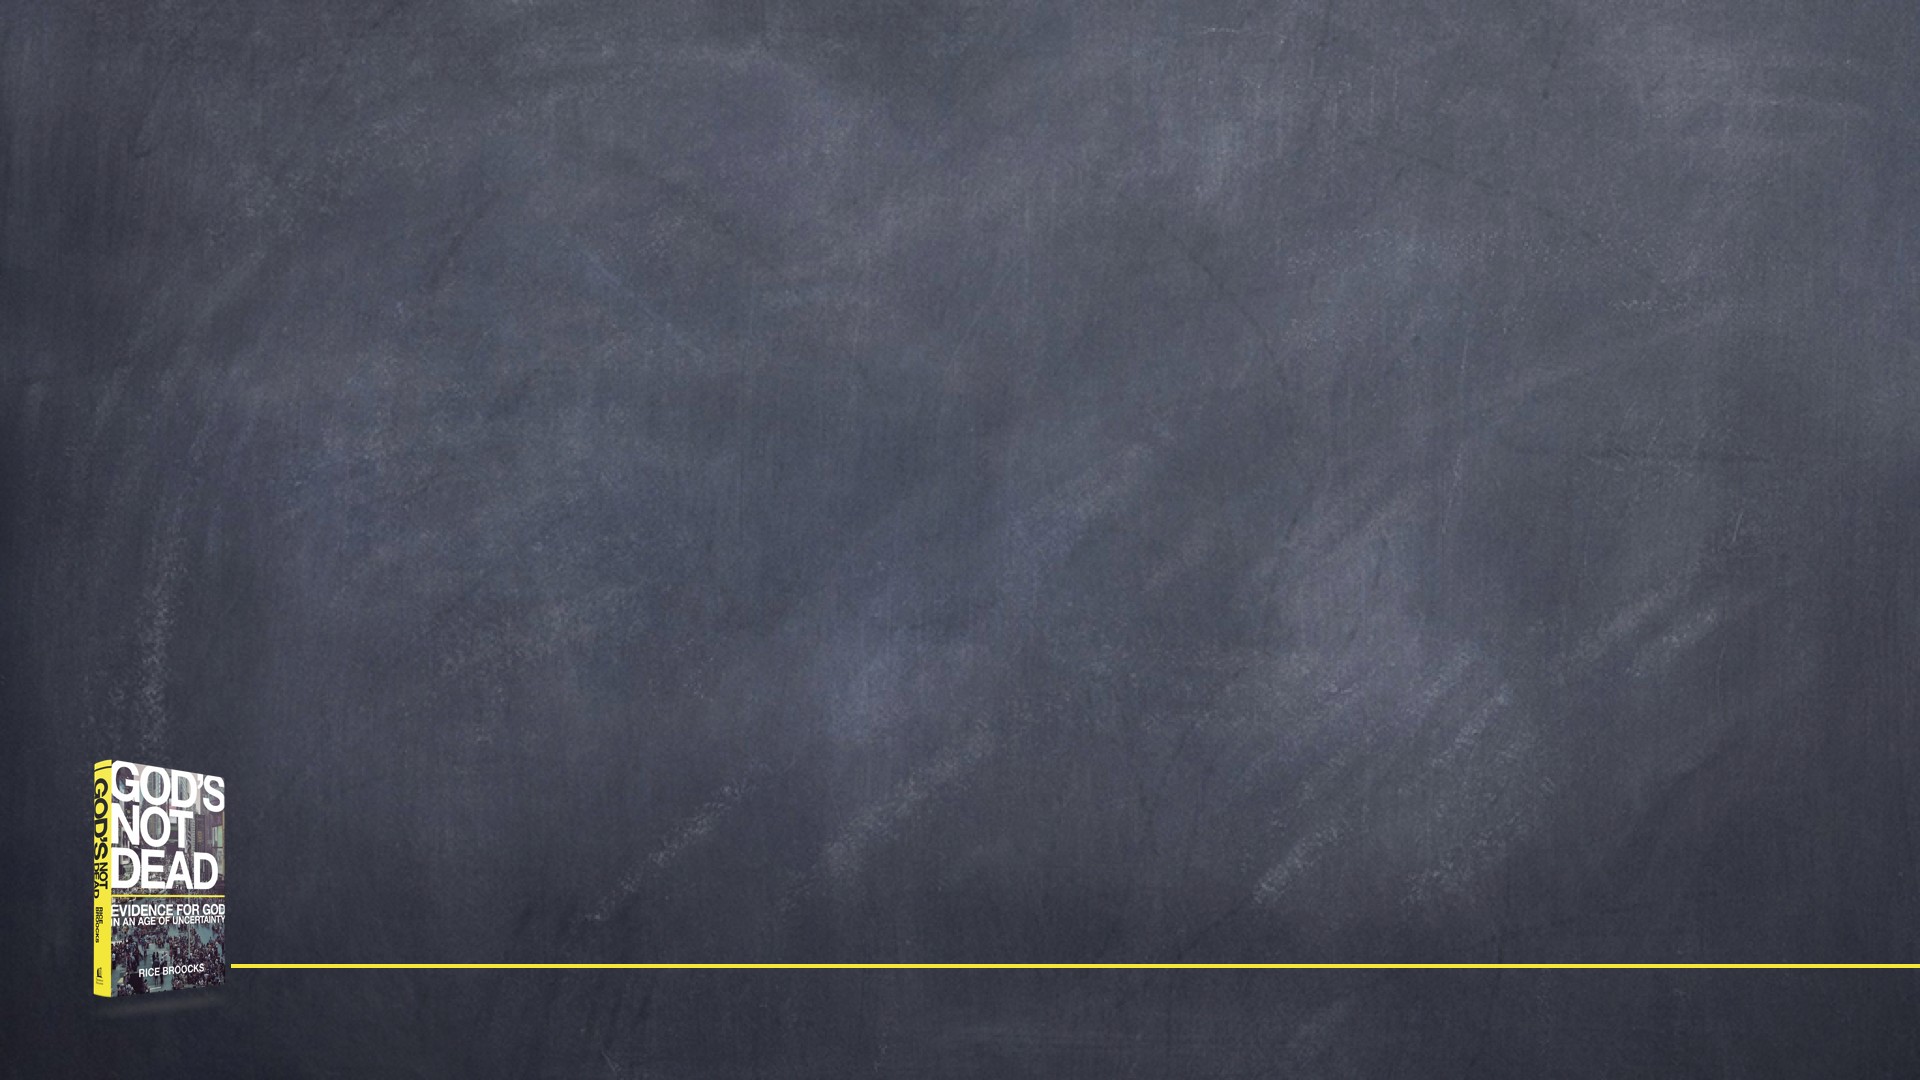 Chalkboard Background Download Free Awesome Hd HD Wallpapers Download Free Map Images Wallpaper [wallpaper684.blogspot.com]